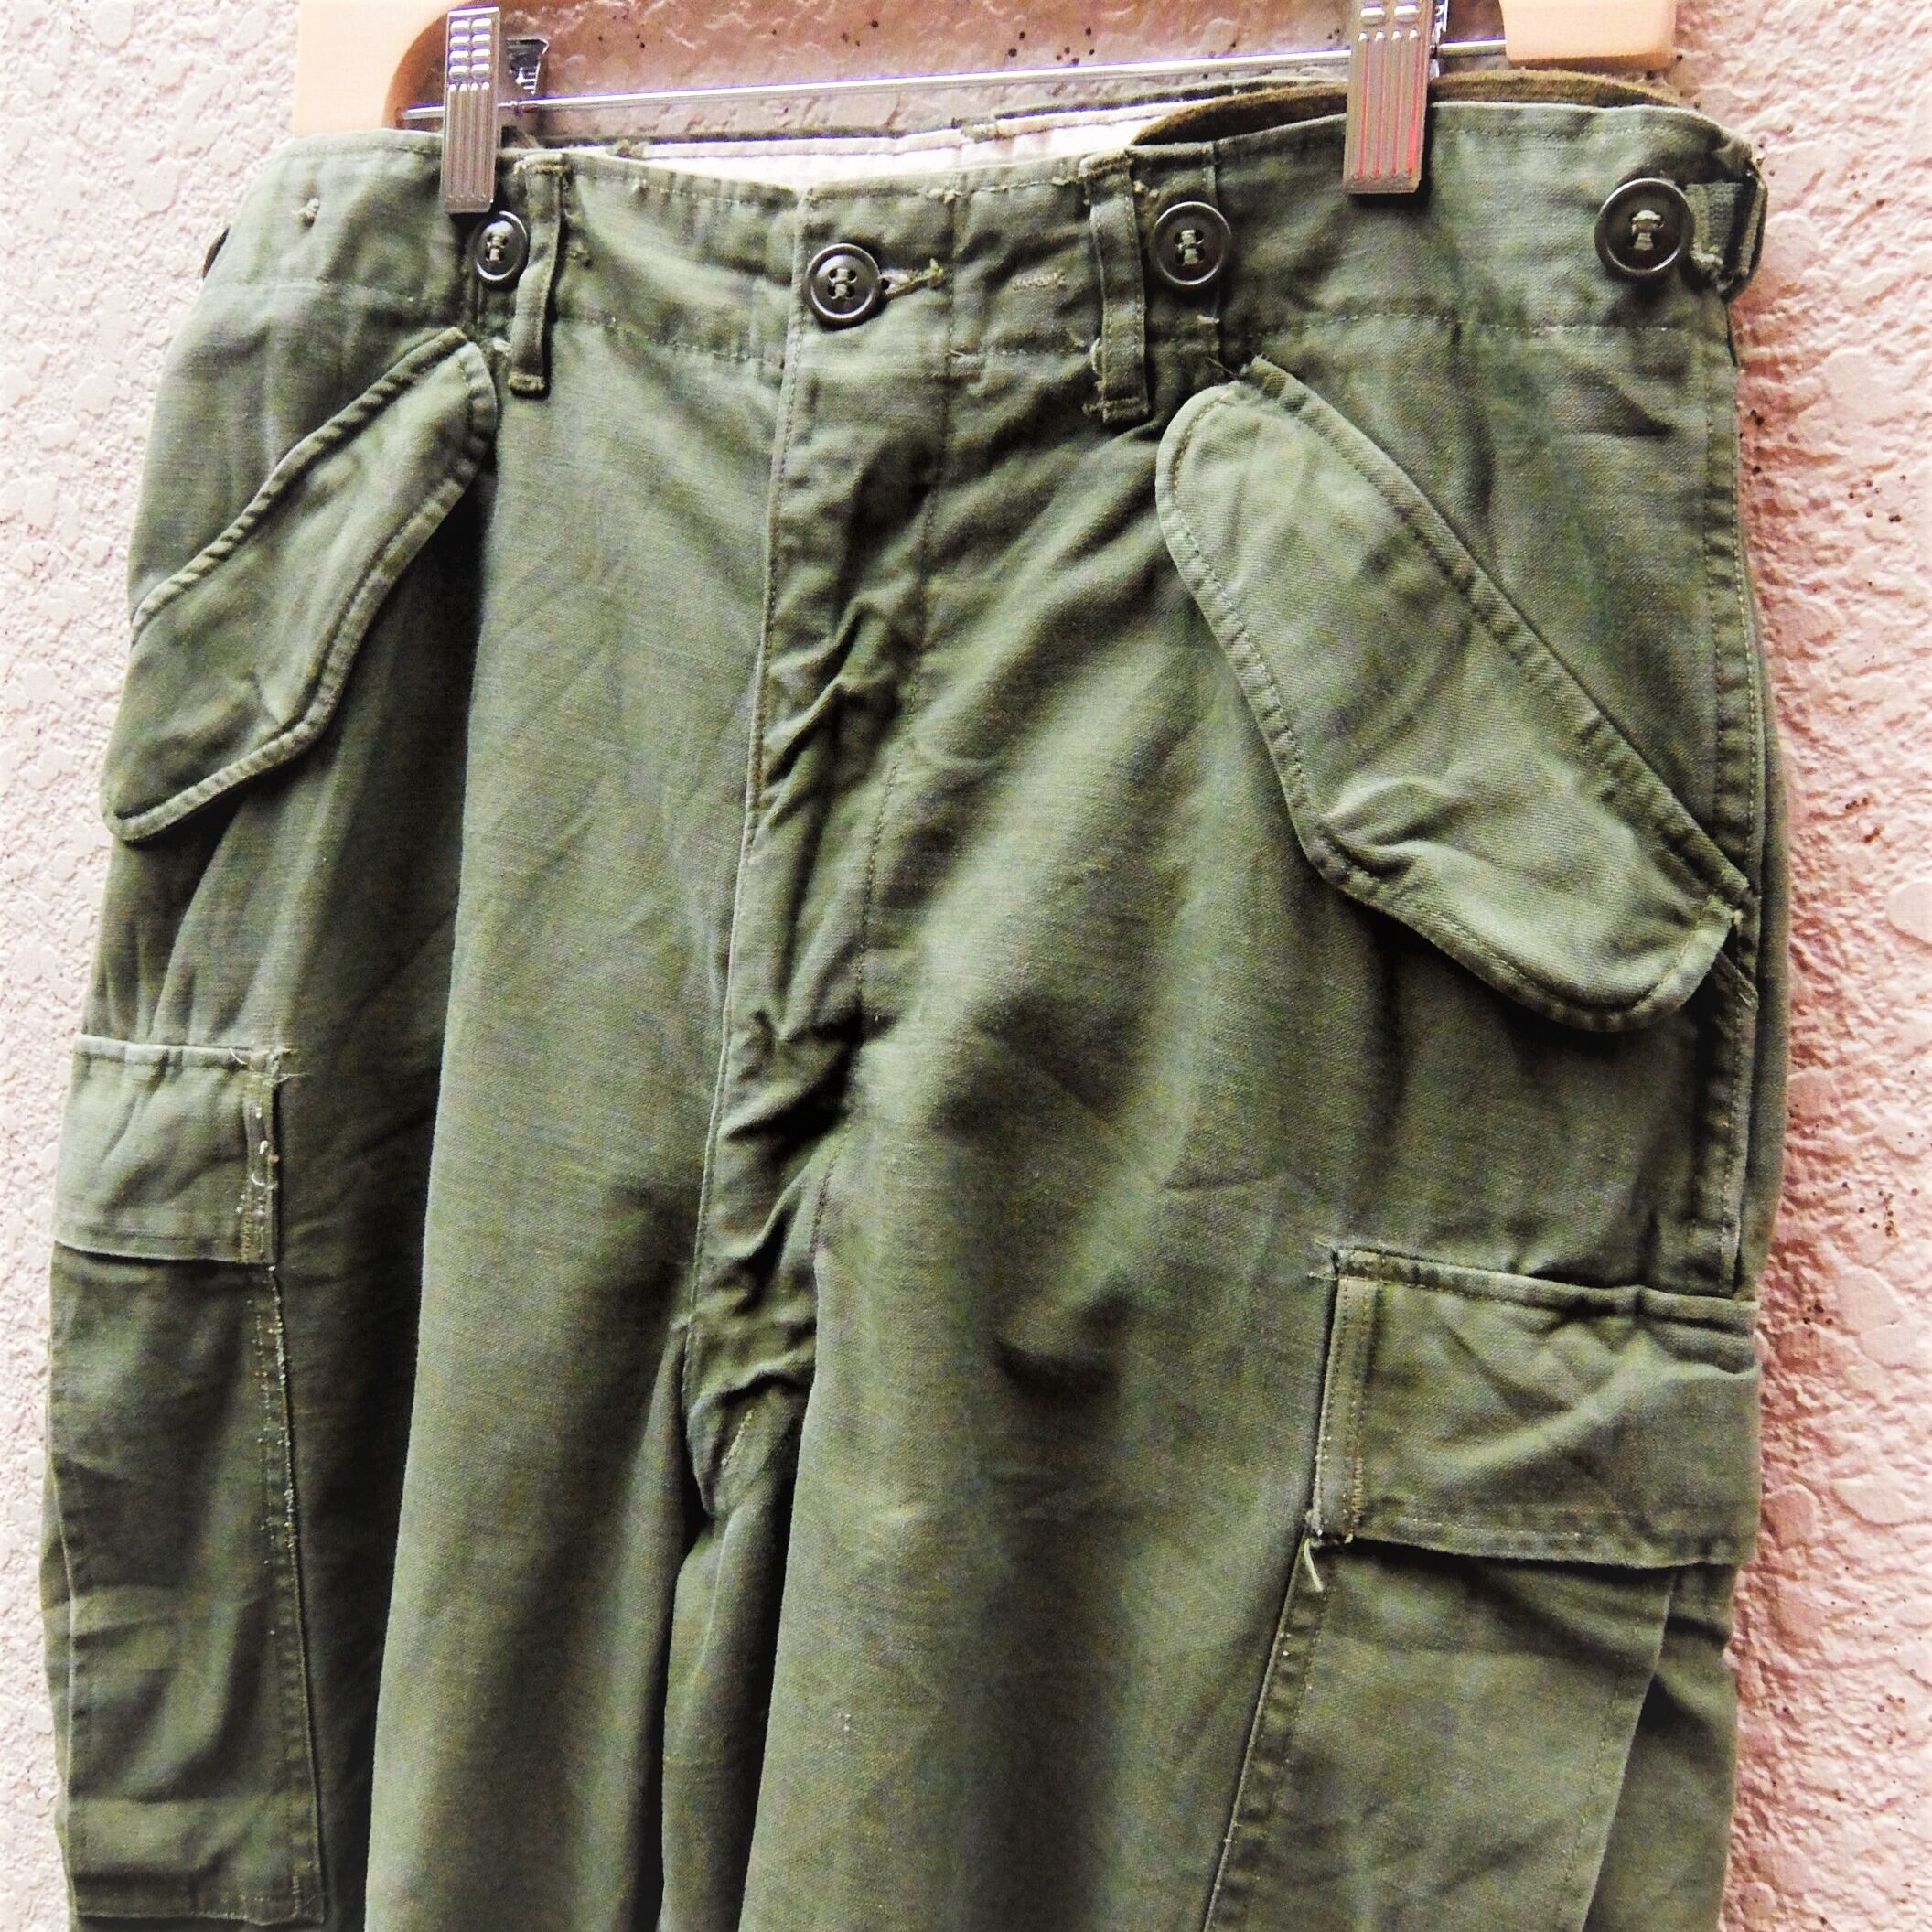 50's U.S.ARMY M-51 Field Trousers／50年代 アメリカ陸軍 M-51 フィールド トラウザーズ | BIG TIME  ｜ヴィンテージ 古着 BIGTIME（ビッグタイム） powered by BASE